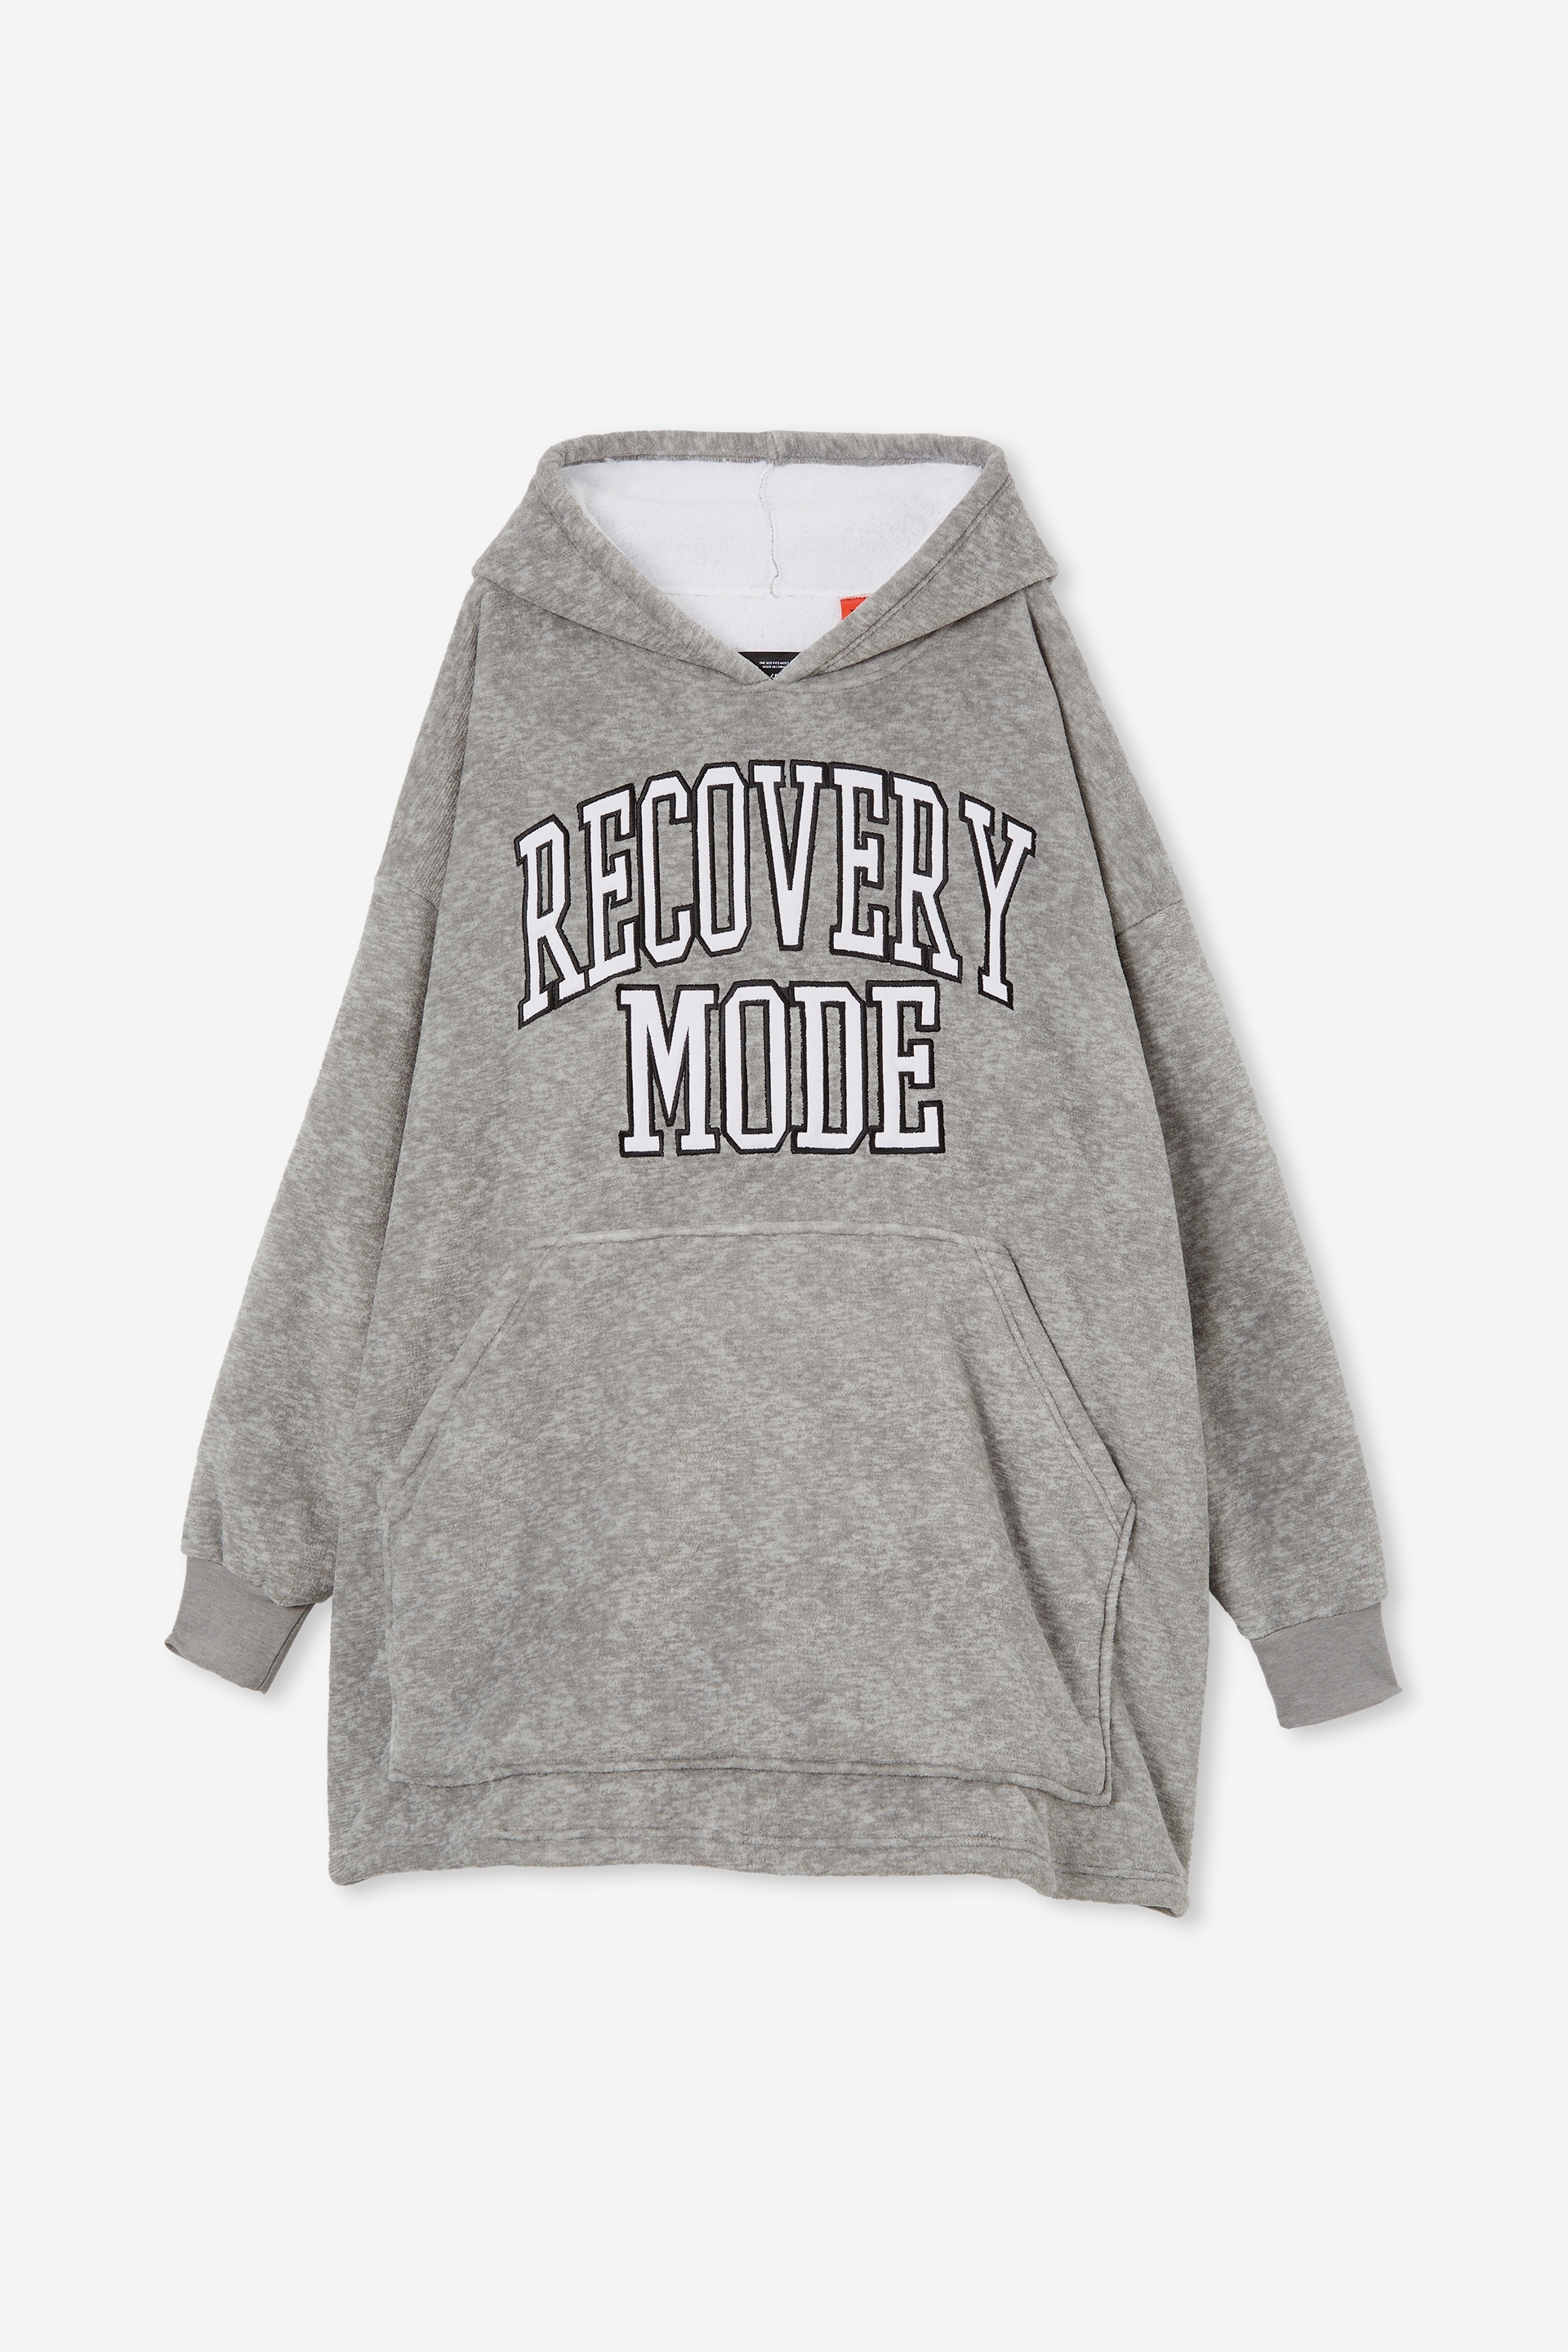 Typo - Slounge Around Oversized Hoodie - Recovery mode grey